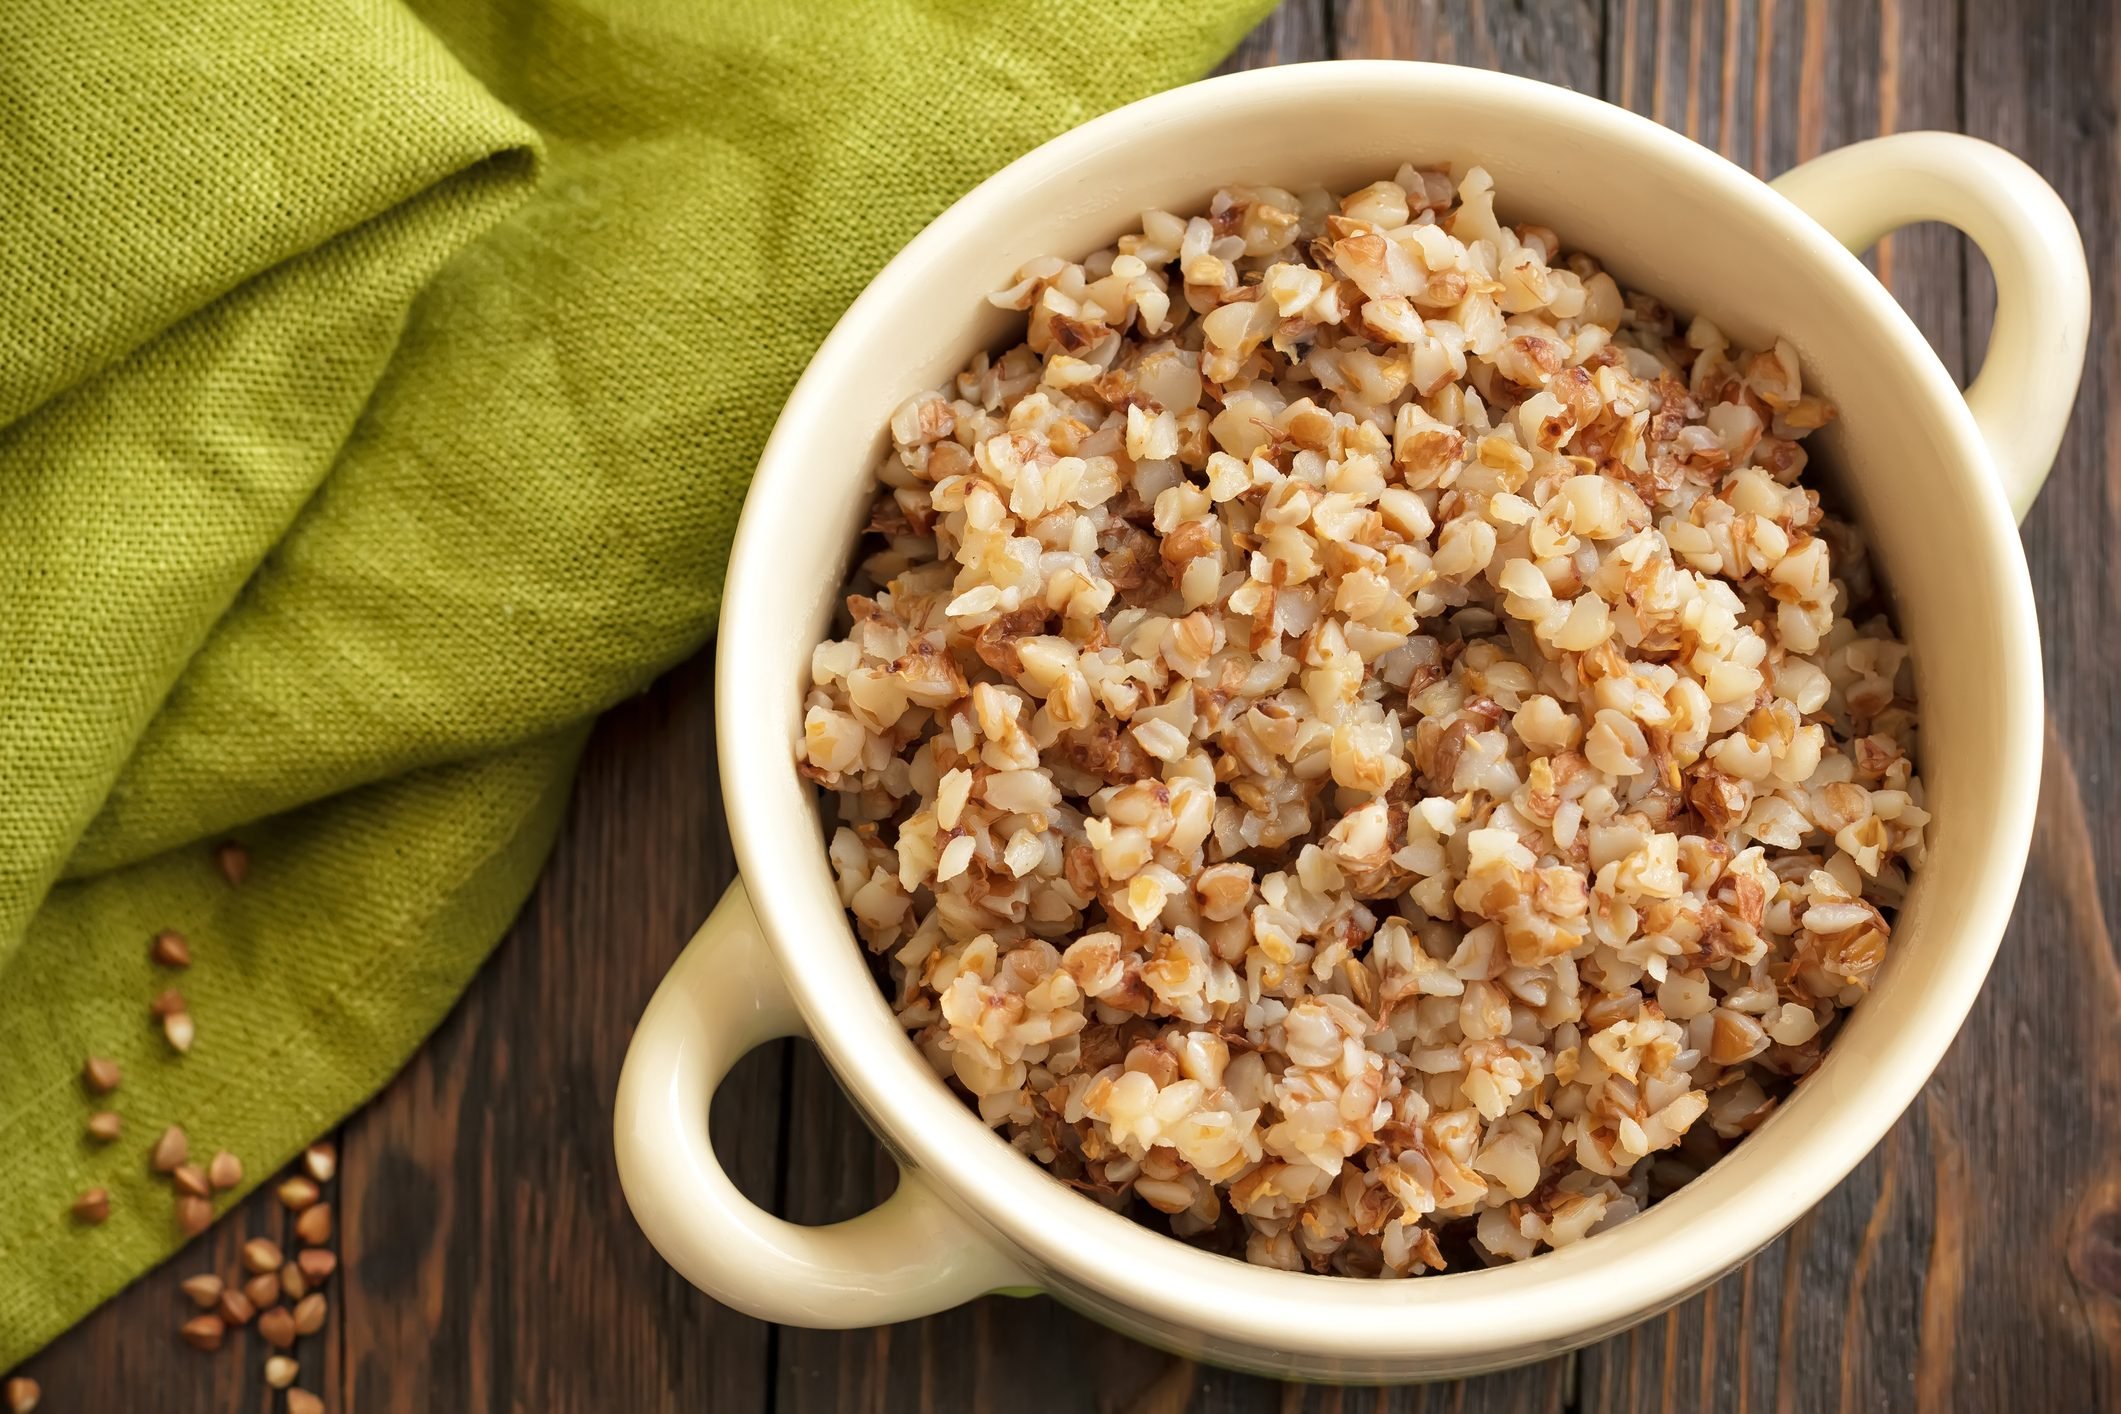 Should You Eat Buckwheat Groats? Here's Why—and How to Cook With Them